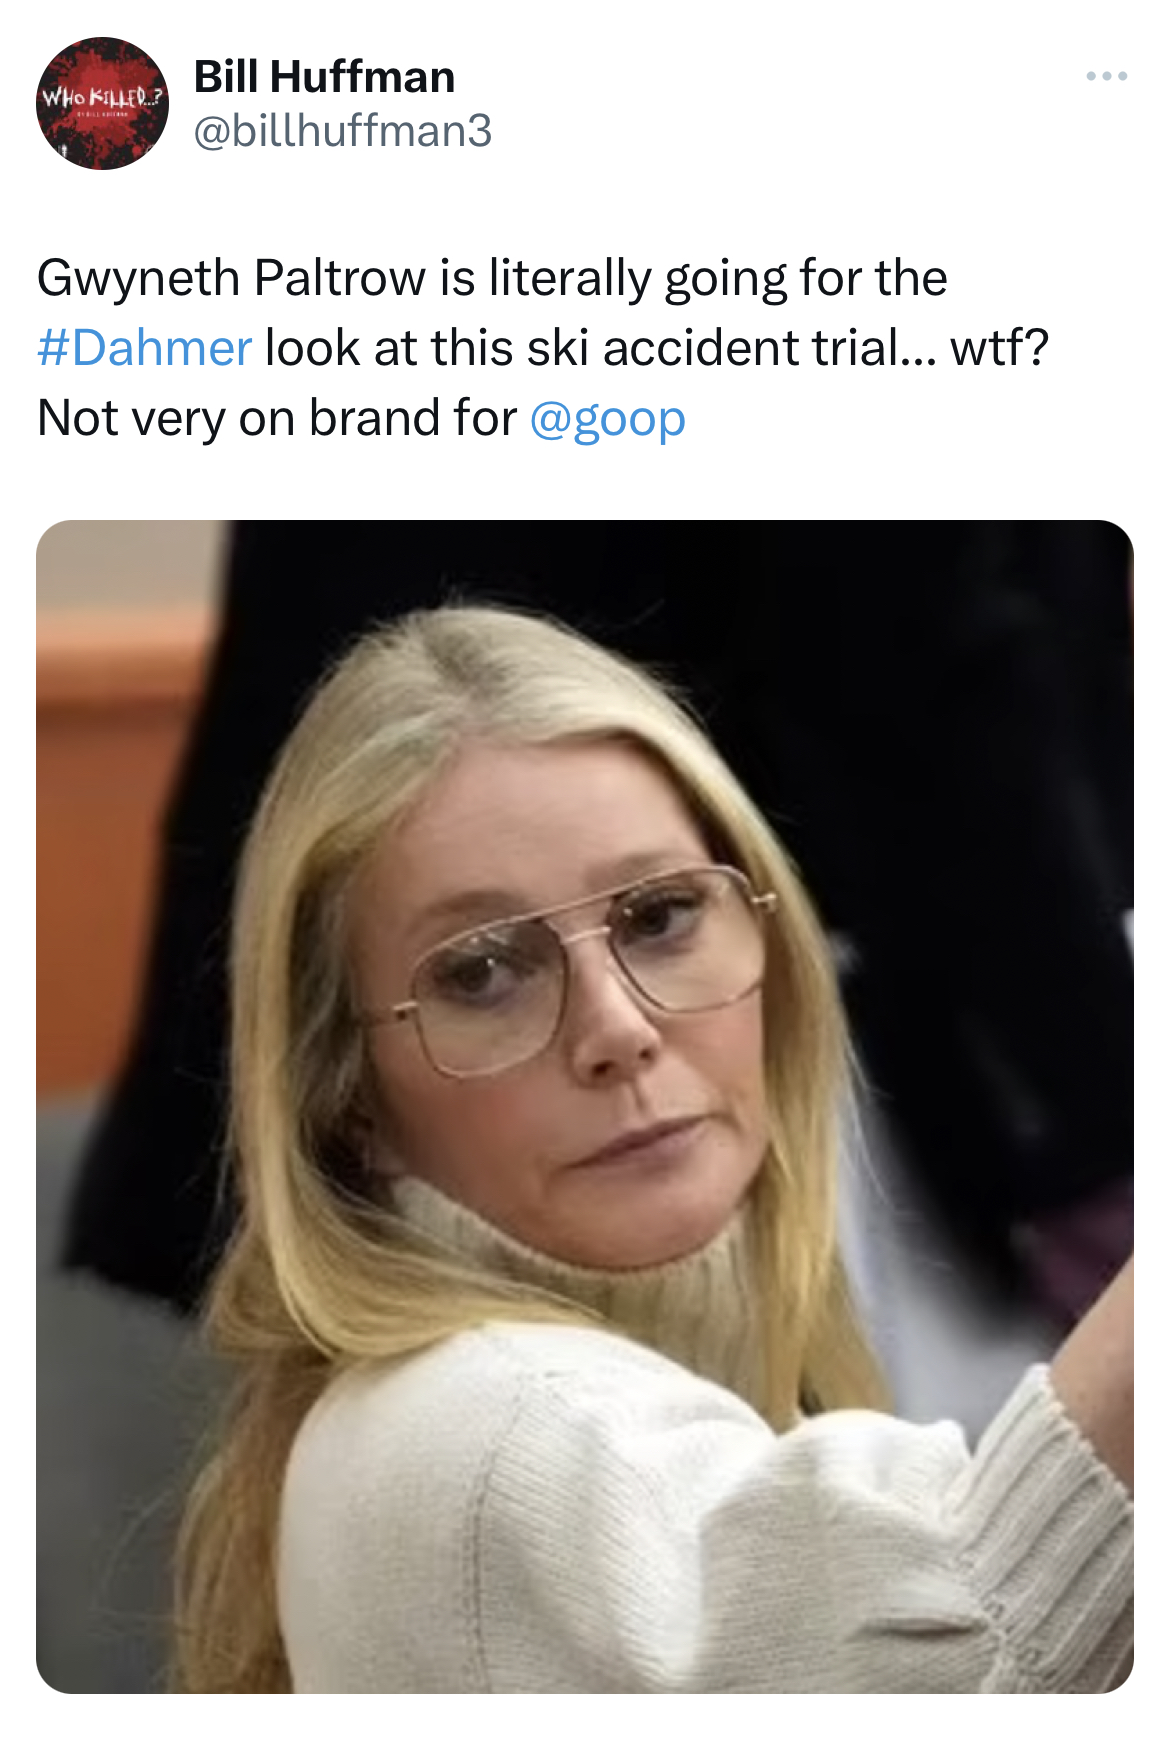 Gwyneth Paltrow Jeffrey Dahmer memes - Gwyneth Paltrow - Who? Bill Huffman Gwyneth Paltrow is literally going for the look at this ski accident trial... wtf? Not very on brand for